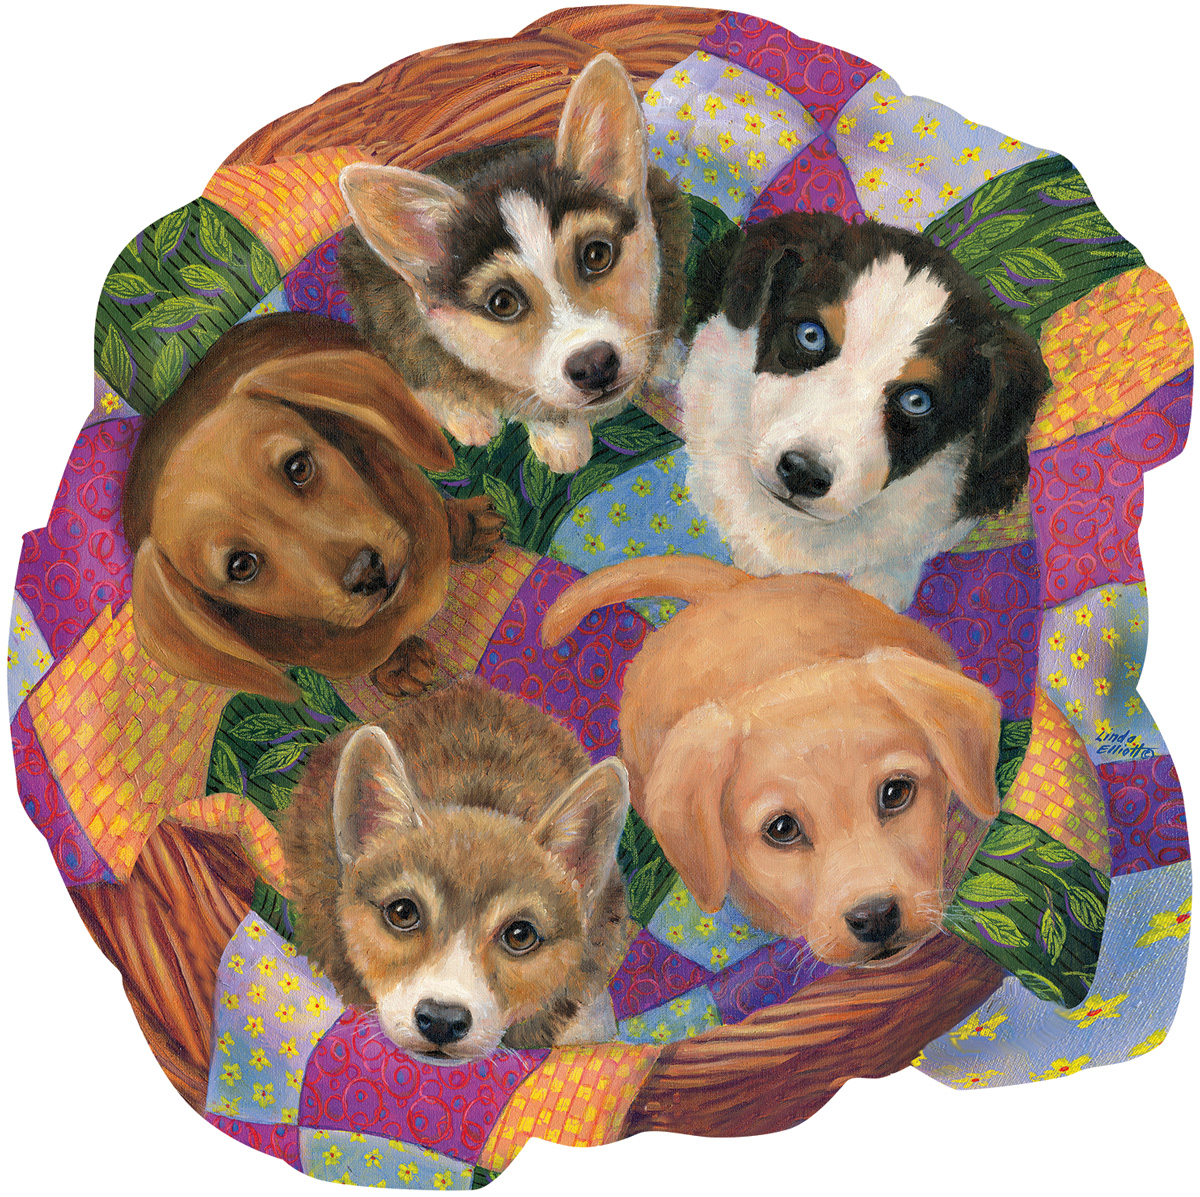 Litter of Puppies Dogs Shaped Puzzle